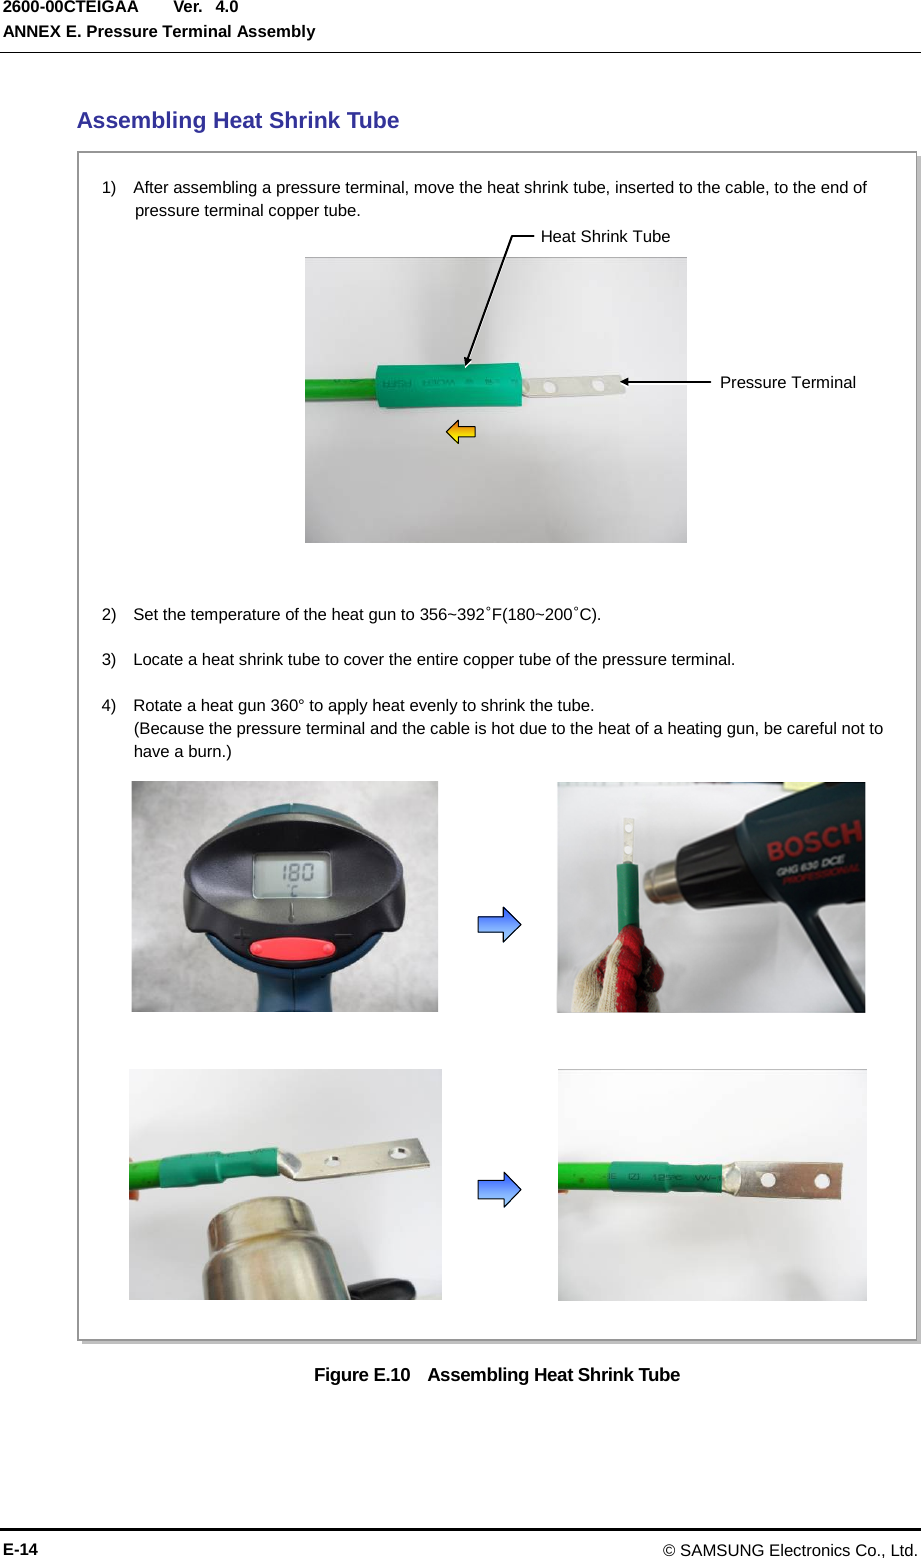  Ver.  ANNEX E. Pressure Terminal Assembly 2600-00CTEIGAA 4.0 Assembling Heat Shrink Tube Figure E.10   Assembling Heat Shrink Tube 2)   Set the temperature of the heat gun to 356~392°F(180~200°C).  3)    Locate a heat shrink tube to cover the entire copper tube of the pressure terminal.  4)    Rotate a heat gun 360° to apply heat evenly to shrink the tube. (Because the pressure terminal and the cable is hot due to the heat of a heating gun, be careful not to have a burn.) 1)  After assembling a pressure terminal, move the heat shrink tube, inserted to the cable, to the end of pressure terminal copper tube. Heat Shrink Tube Pressure Terminal E-14 © SAMSUNG Electronics Co., Ltd. 